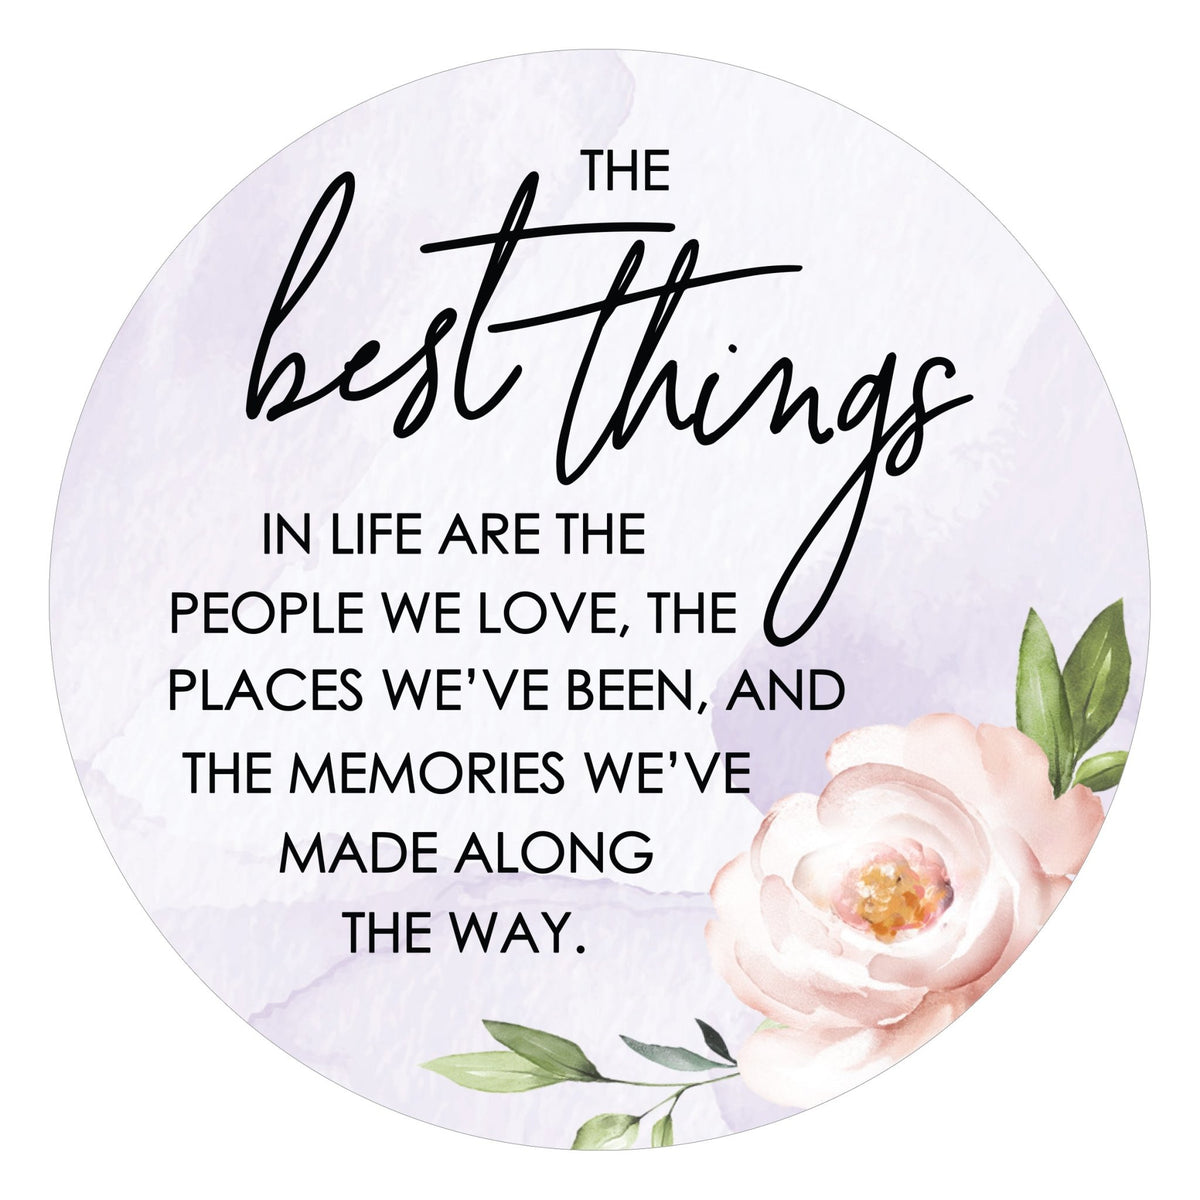 Family &amp; Home Round Refrigerator Magnet Perfect Gift Idea For Home Décor - Best Things